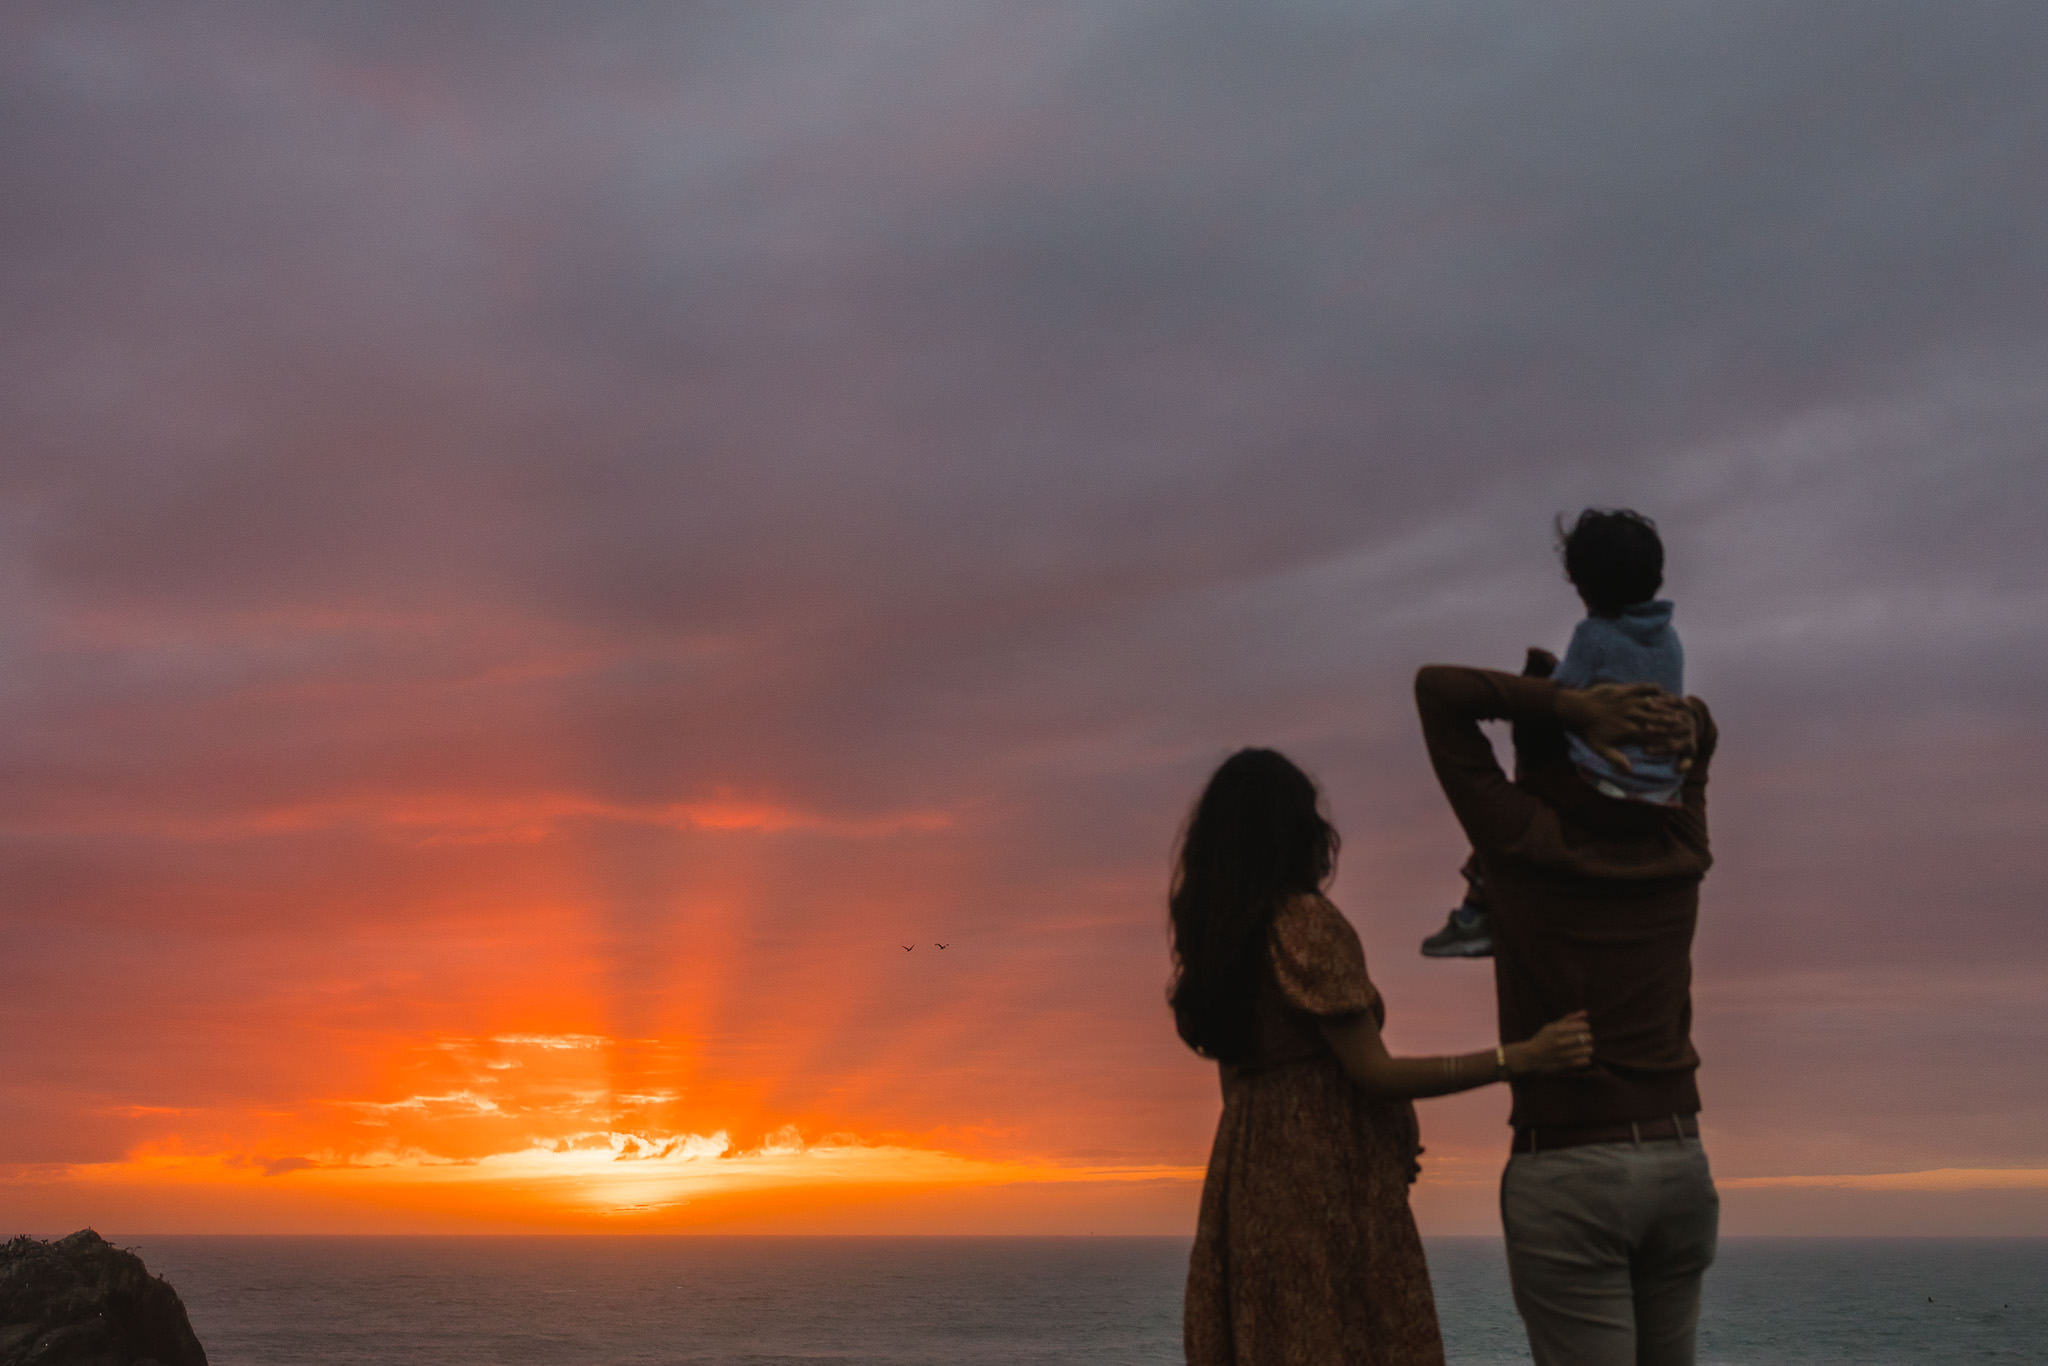 San Francisco family watches sunset at Lands End